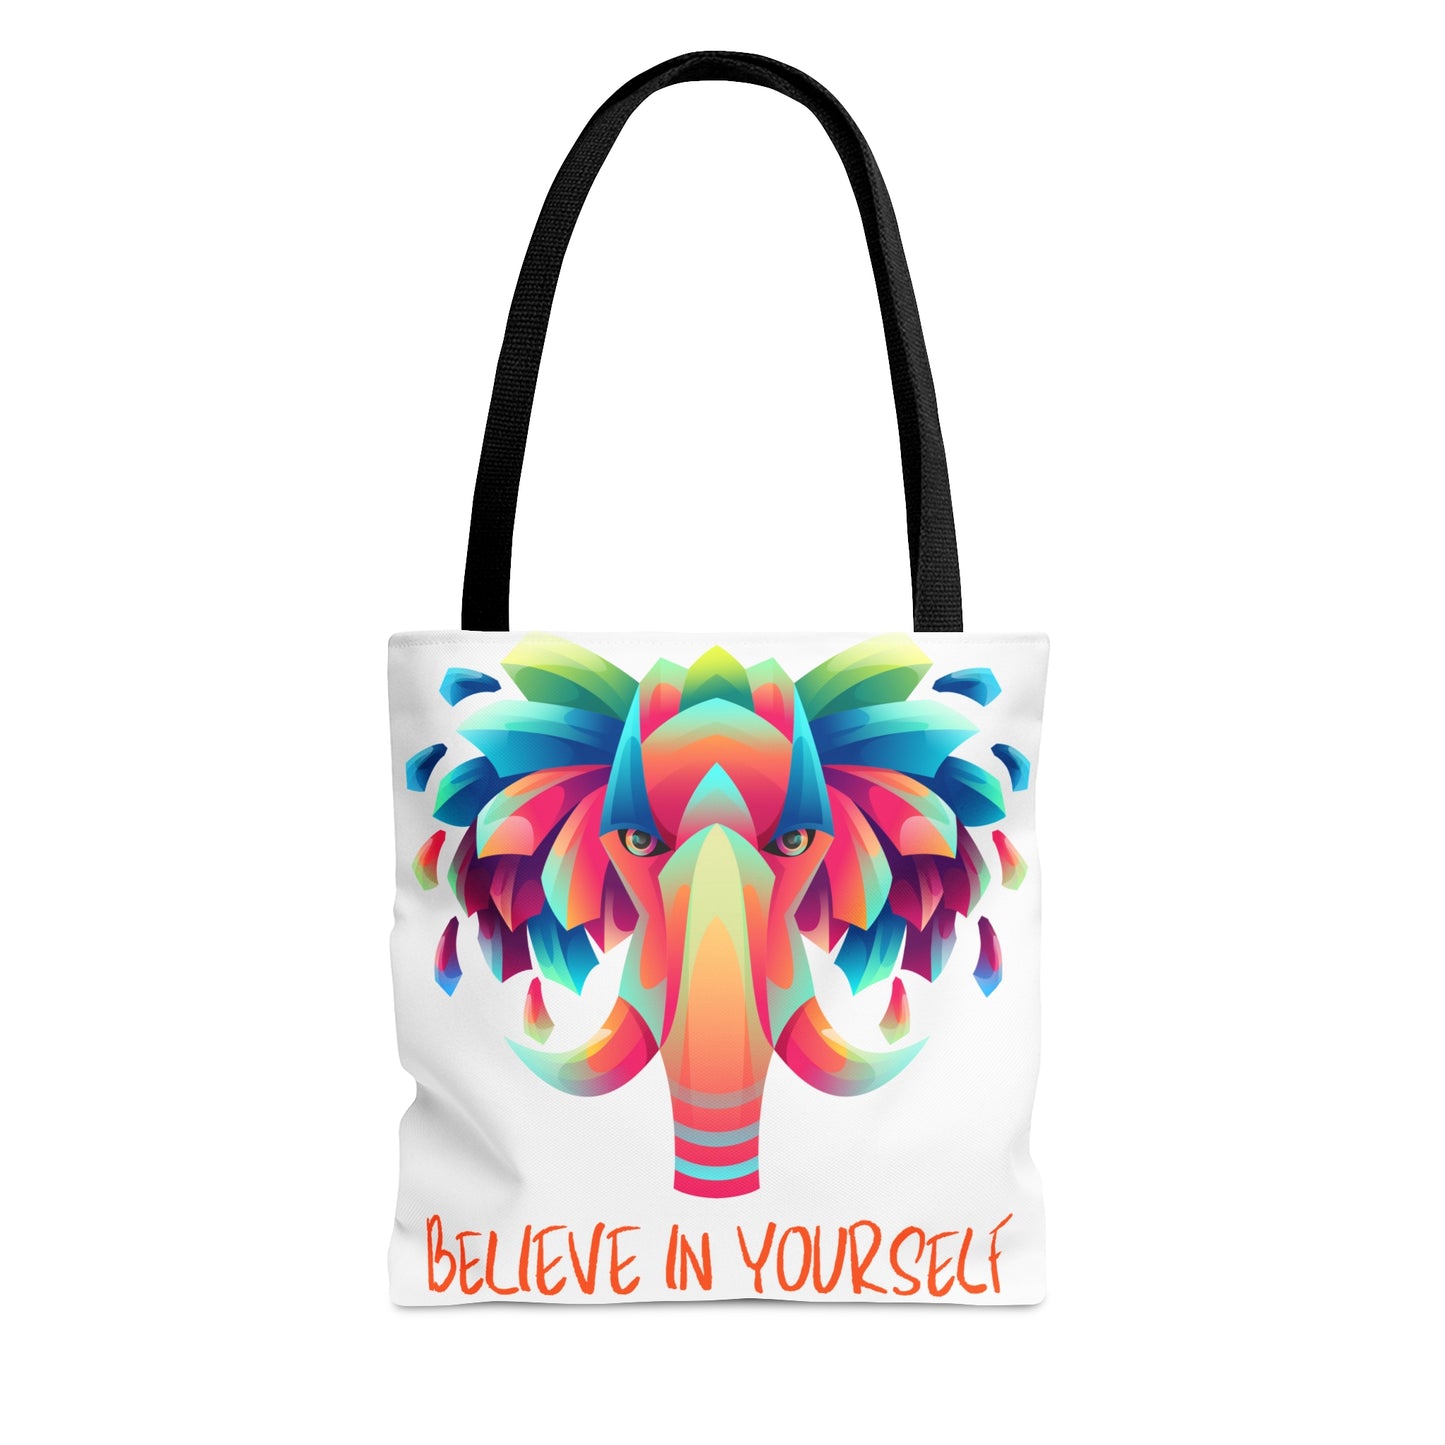 Gorgeous elephant design above “BELIEVE IN YOURSELF” affirmation tote bag. Come in 3 sizes to meet your needs.